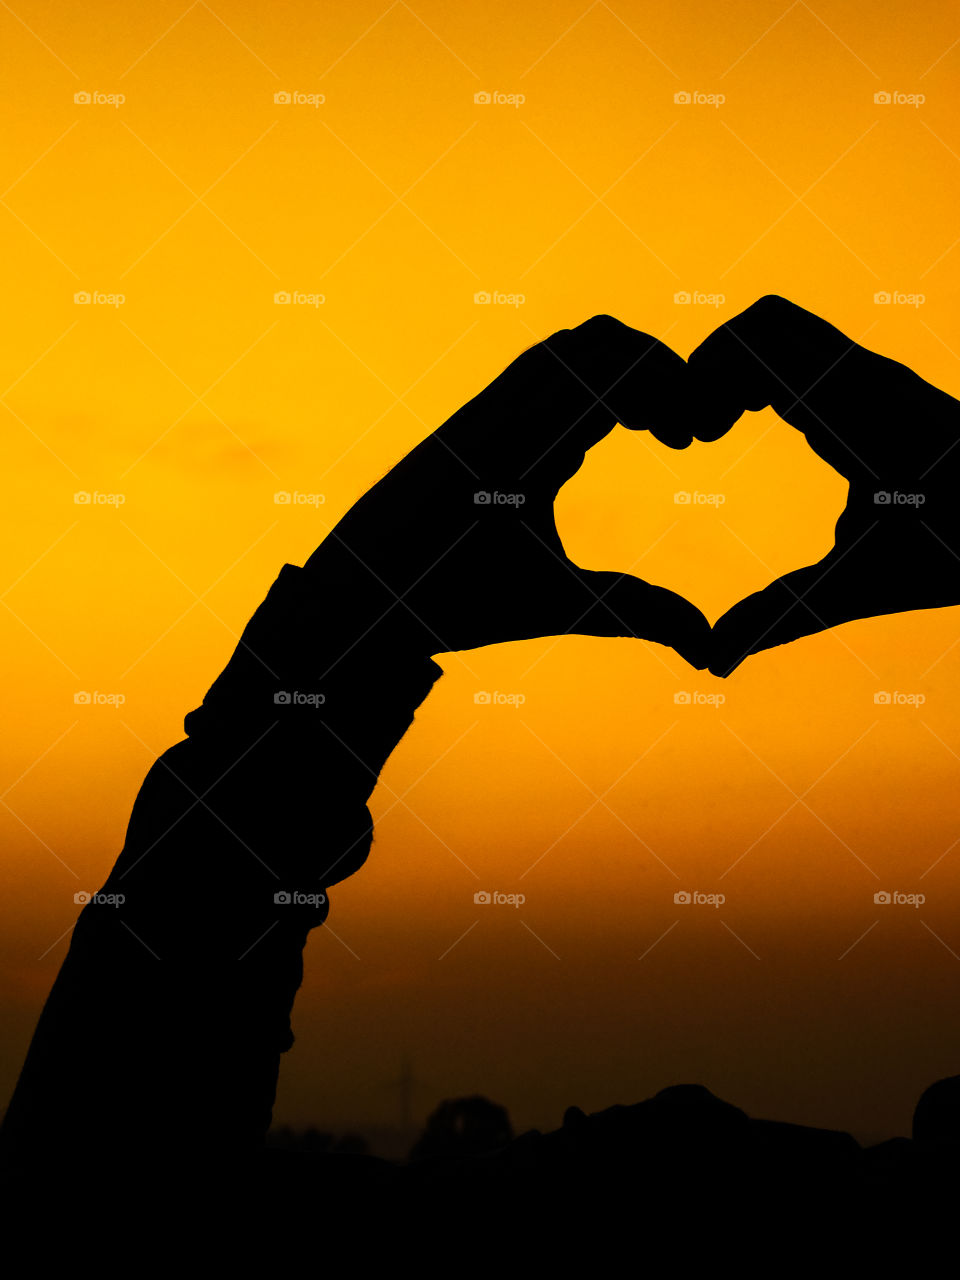 light natural verses artificial,  love wallpaper or heart shaped hand posture with beautiful background.